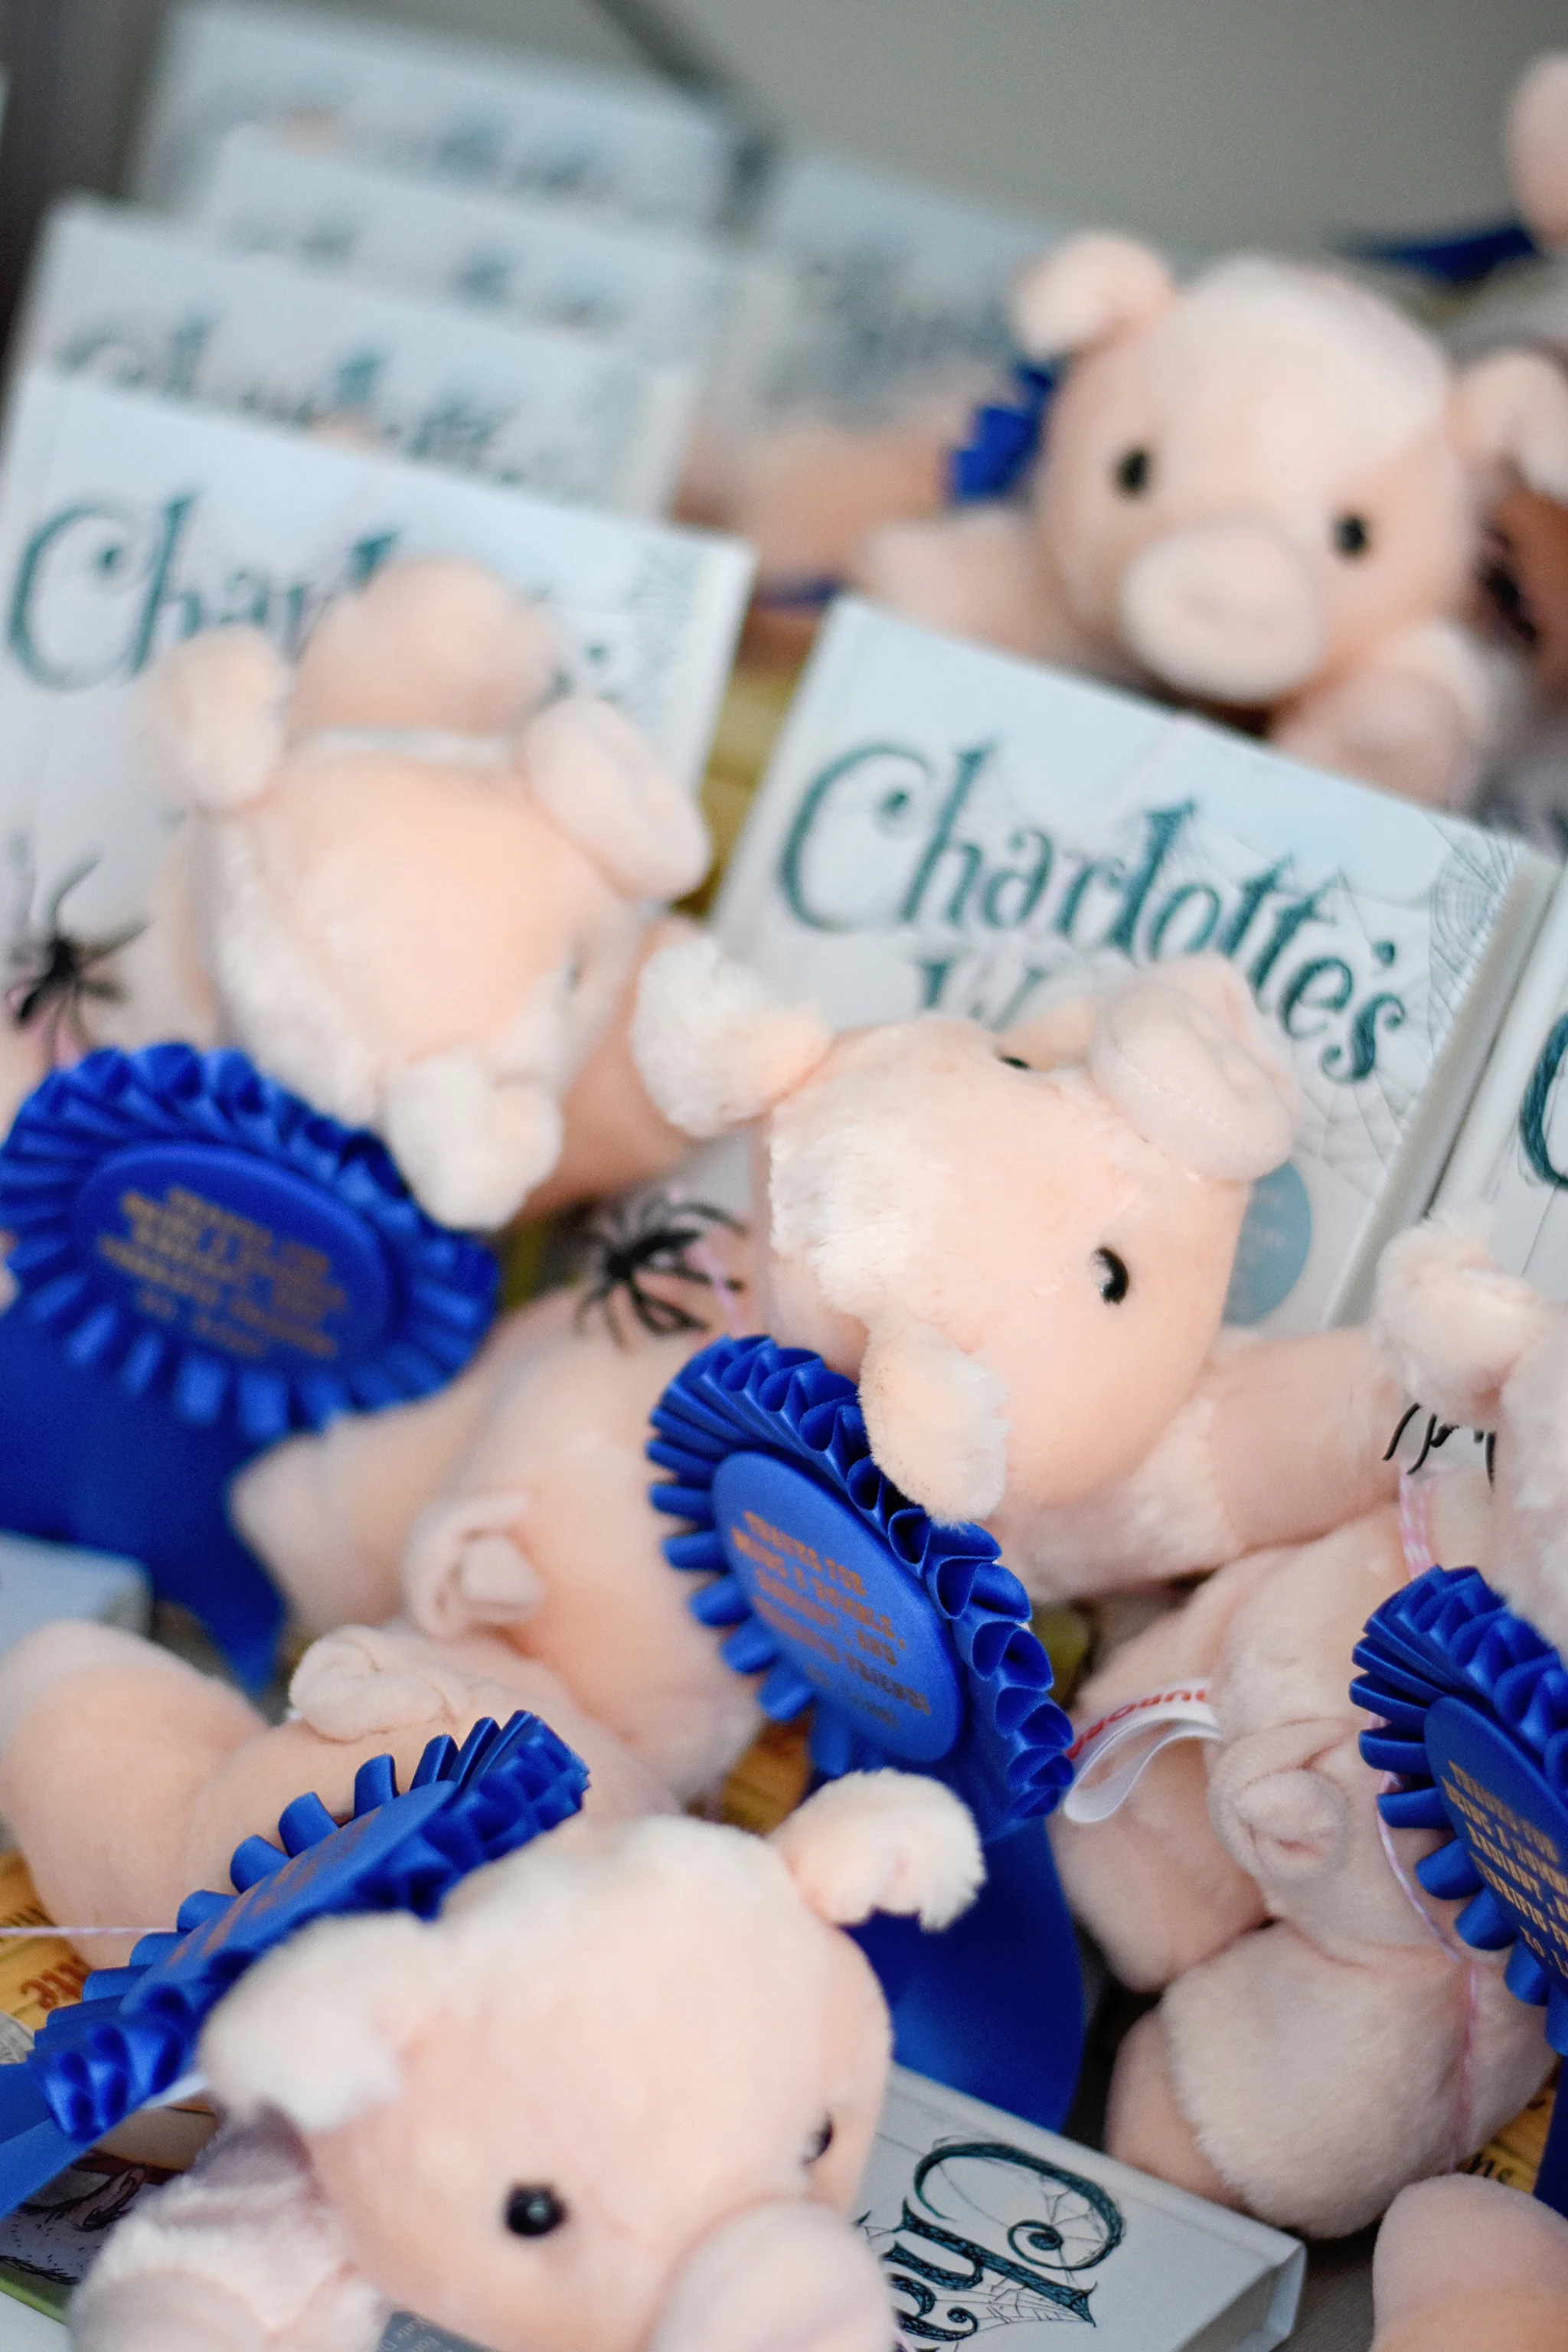 Charlotte's Web Party Favors: Plush Wilbur and a copy of the book!